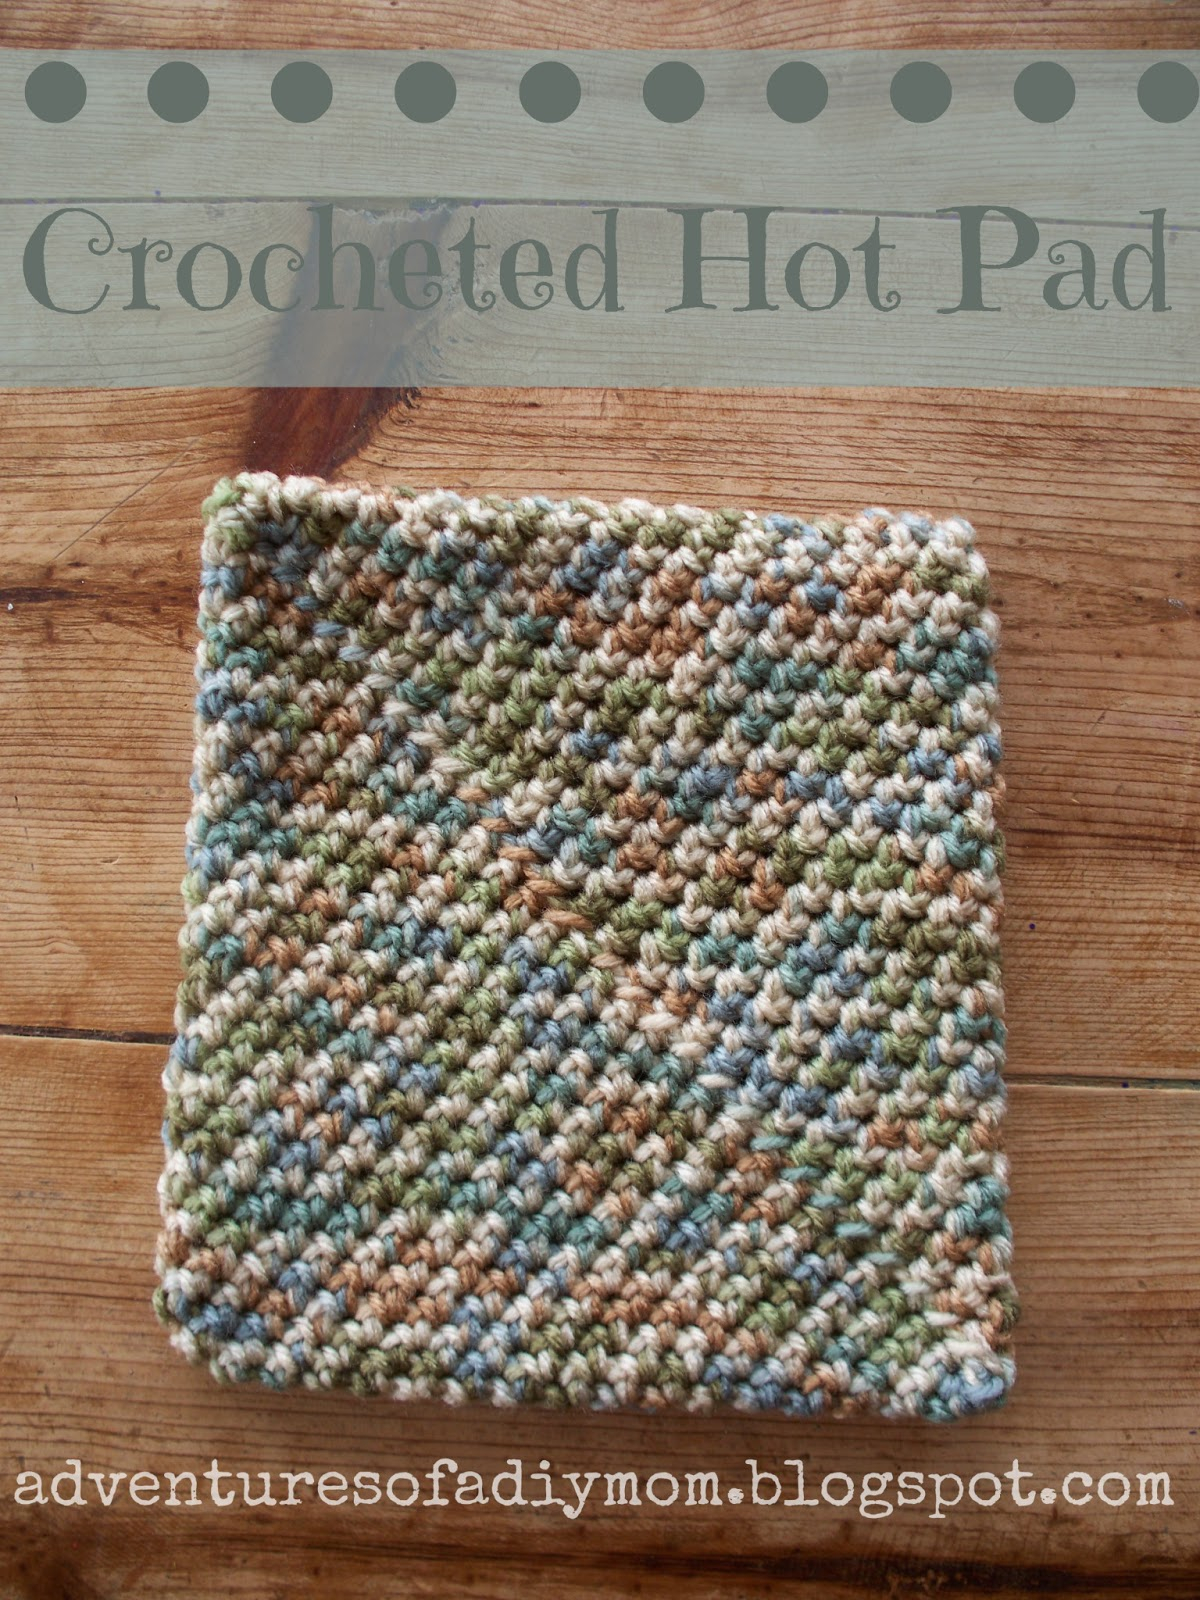 Thick Crochet Potholder Pattern How To Crochet A Hotpad Super Easy Version Adventures Of A Diy Mom